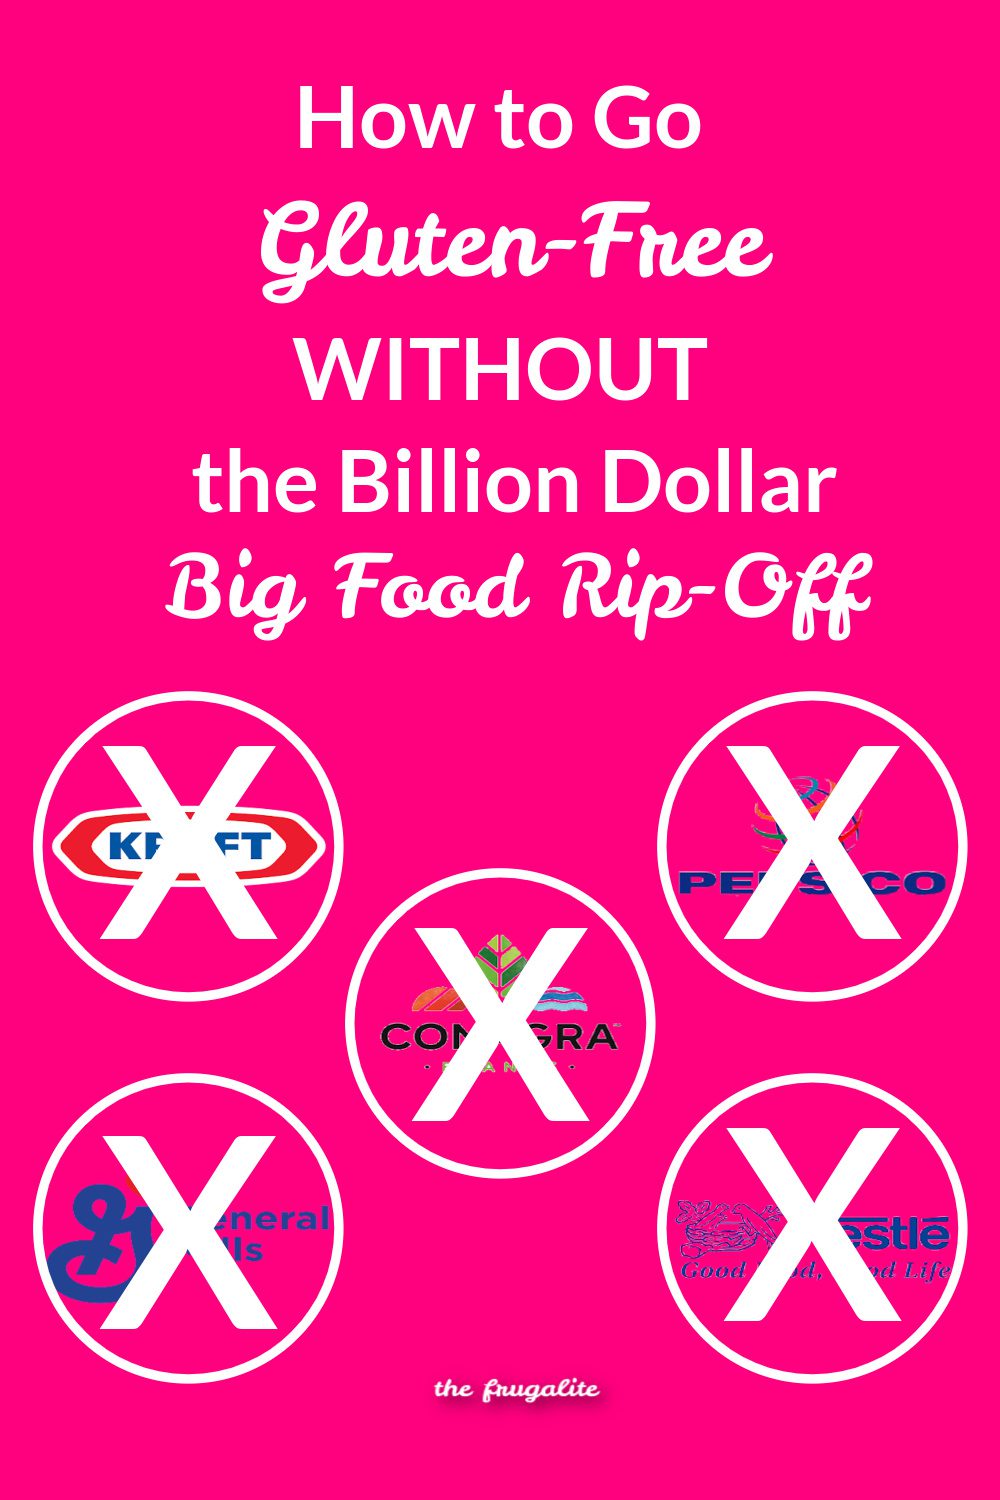 How to Go Gluten-Free Without the Billion Dollar Big Food Rip-Off